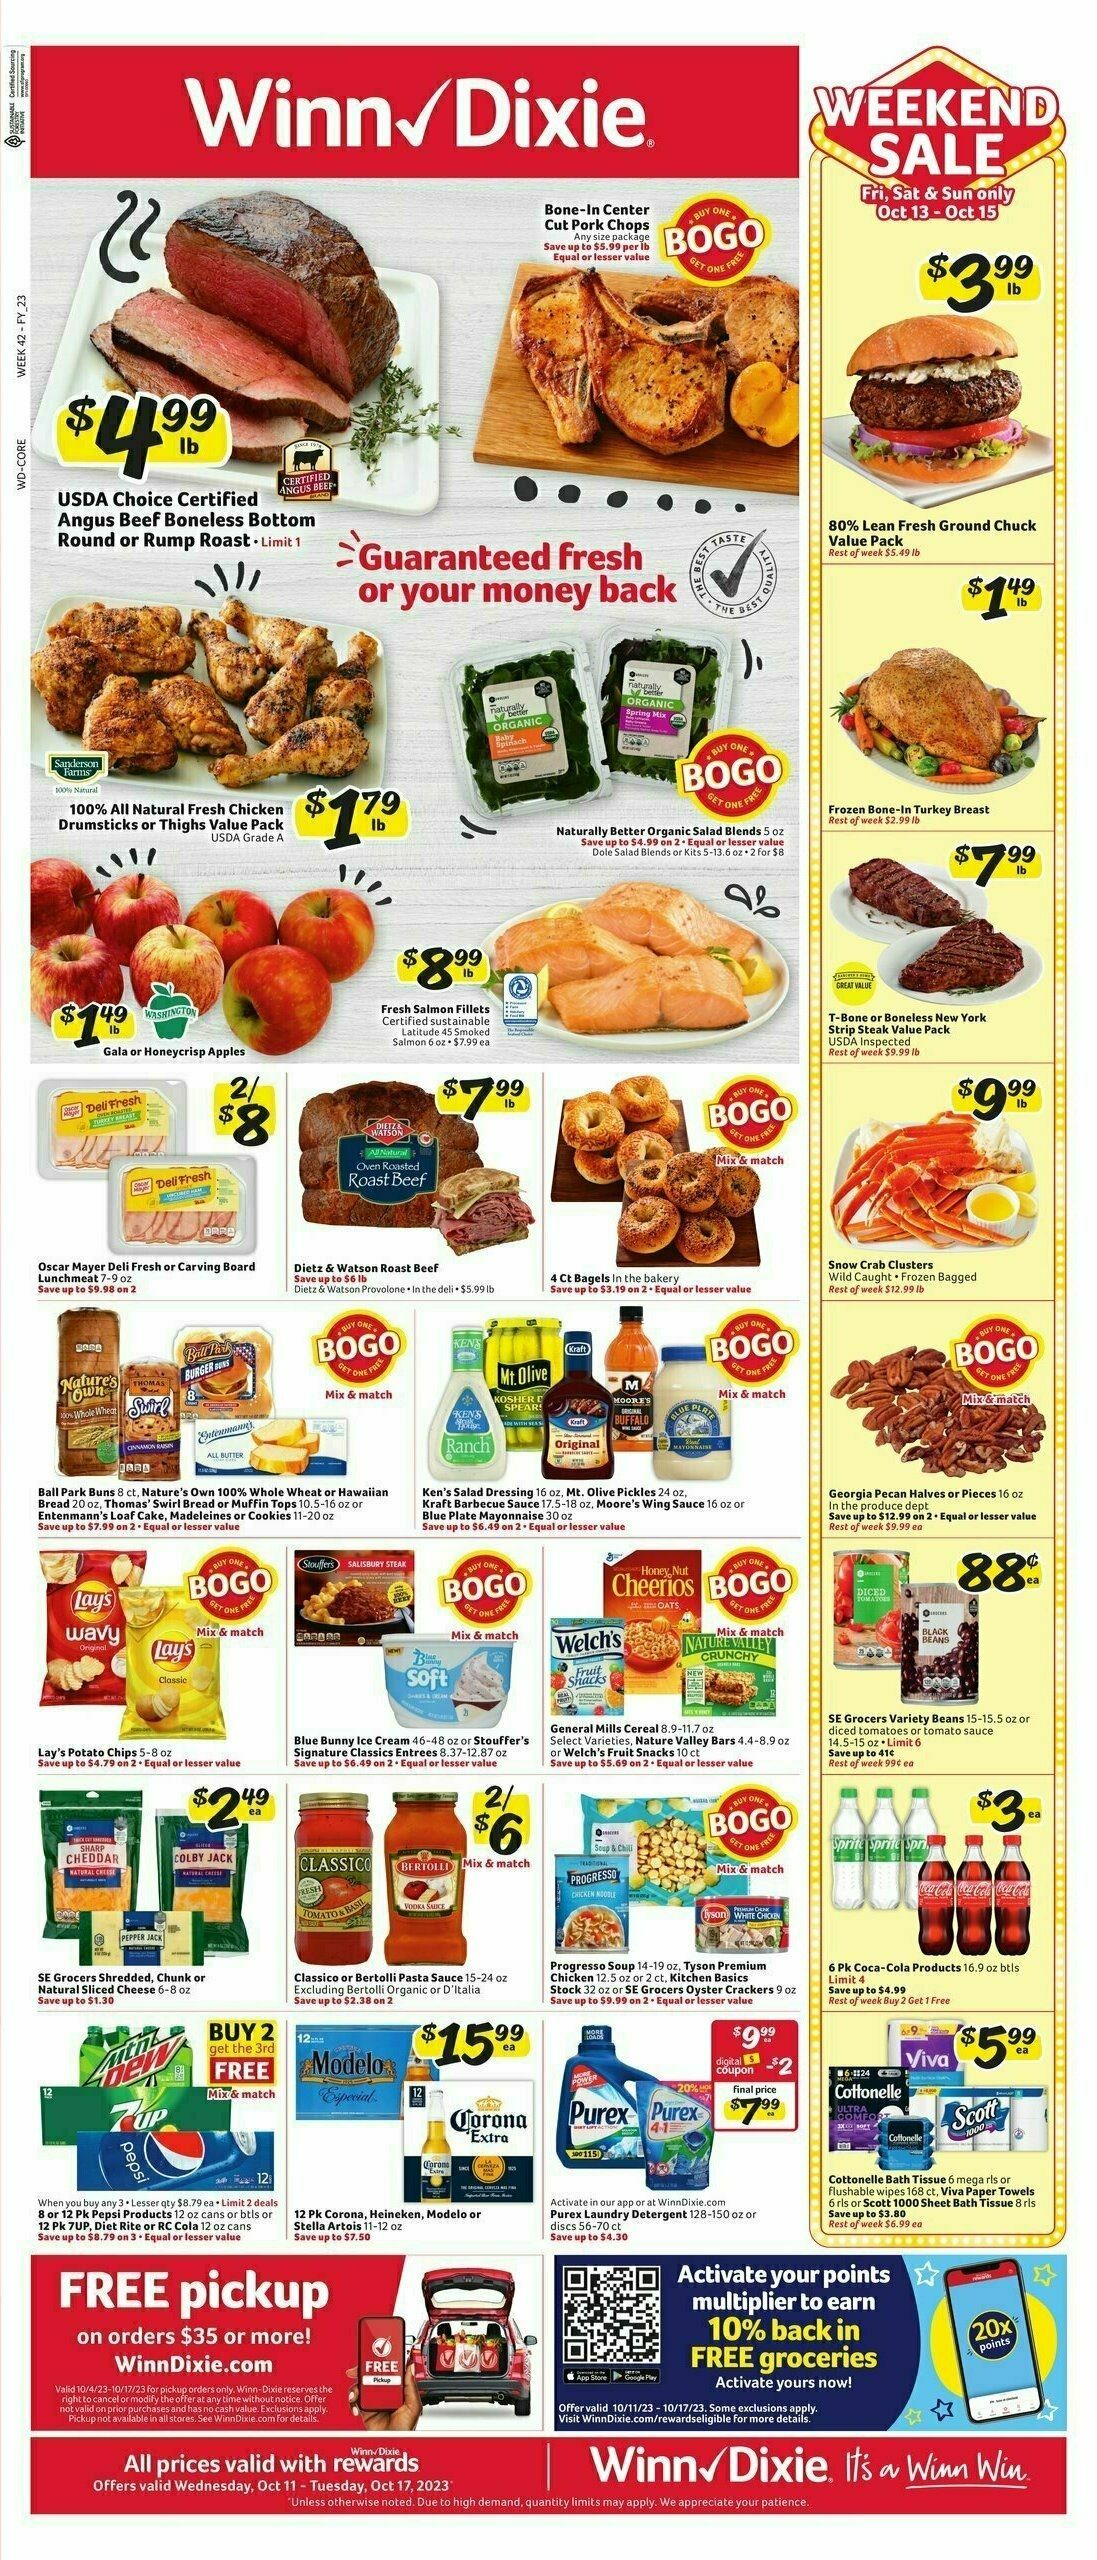 Winn-Dixie Weekly Ad from October 11